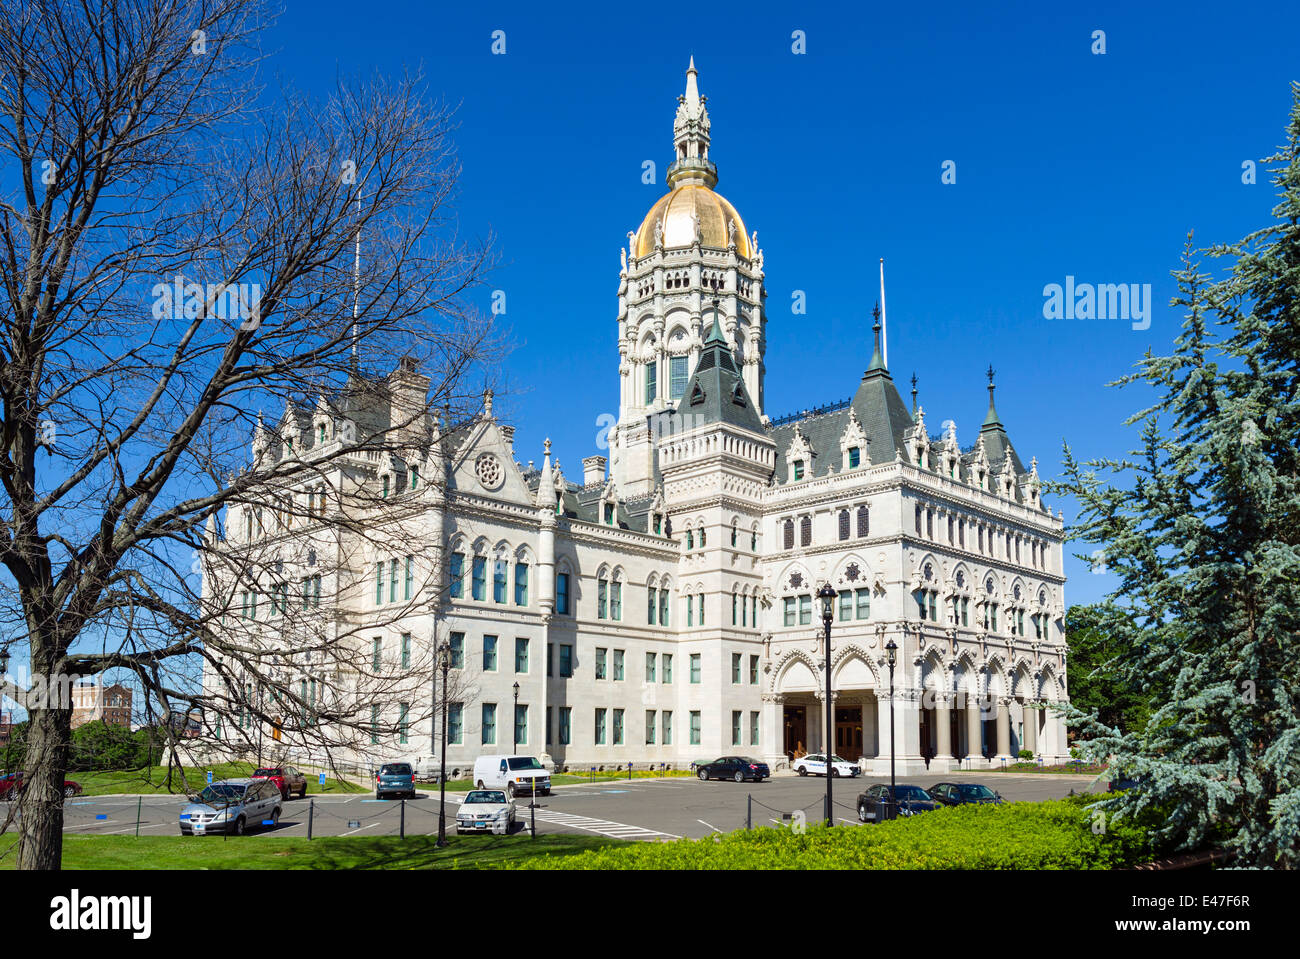 Connecticut State Capitol Building, Hartford, Connecticut, USA Stockfoto